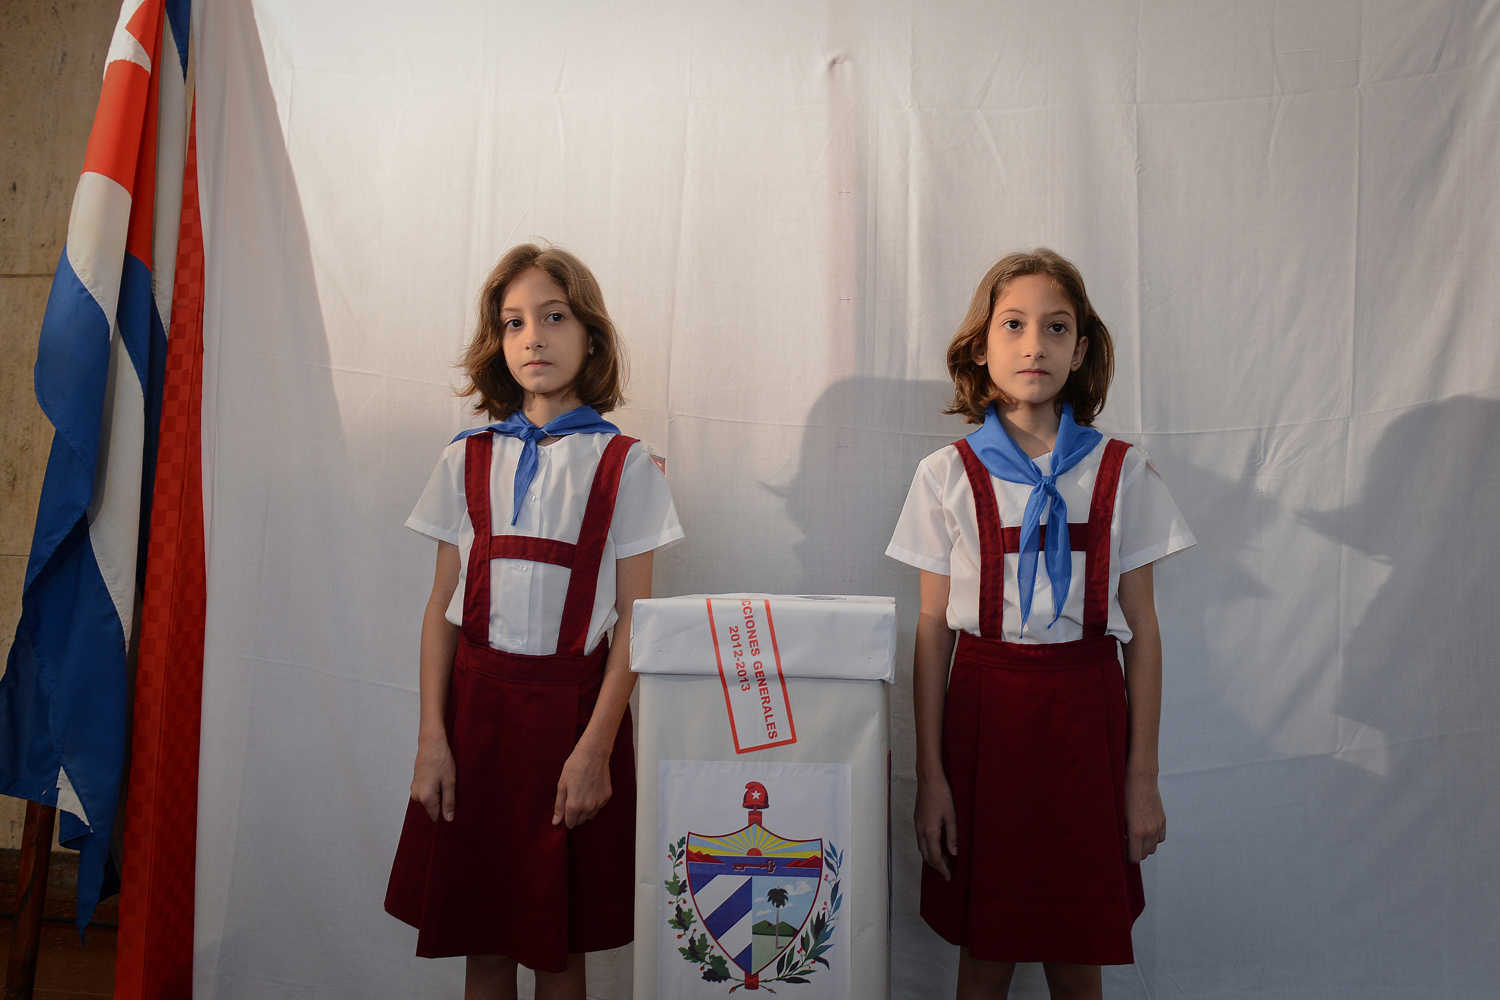 Image: Oct. 21, 2012. Two Cuban girls guard a polling station in Havana. Cubans lined up at polling stations Sunday for municipal elections in the one-party Communist-run island.